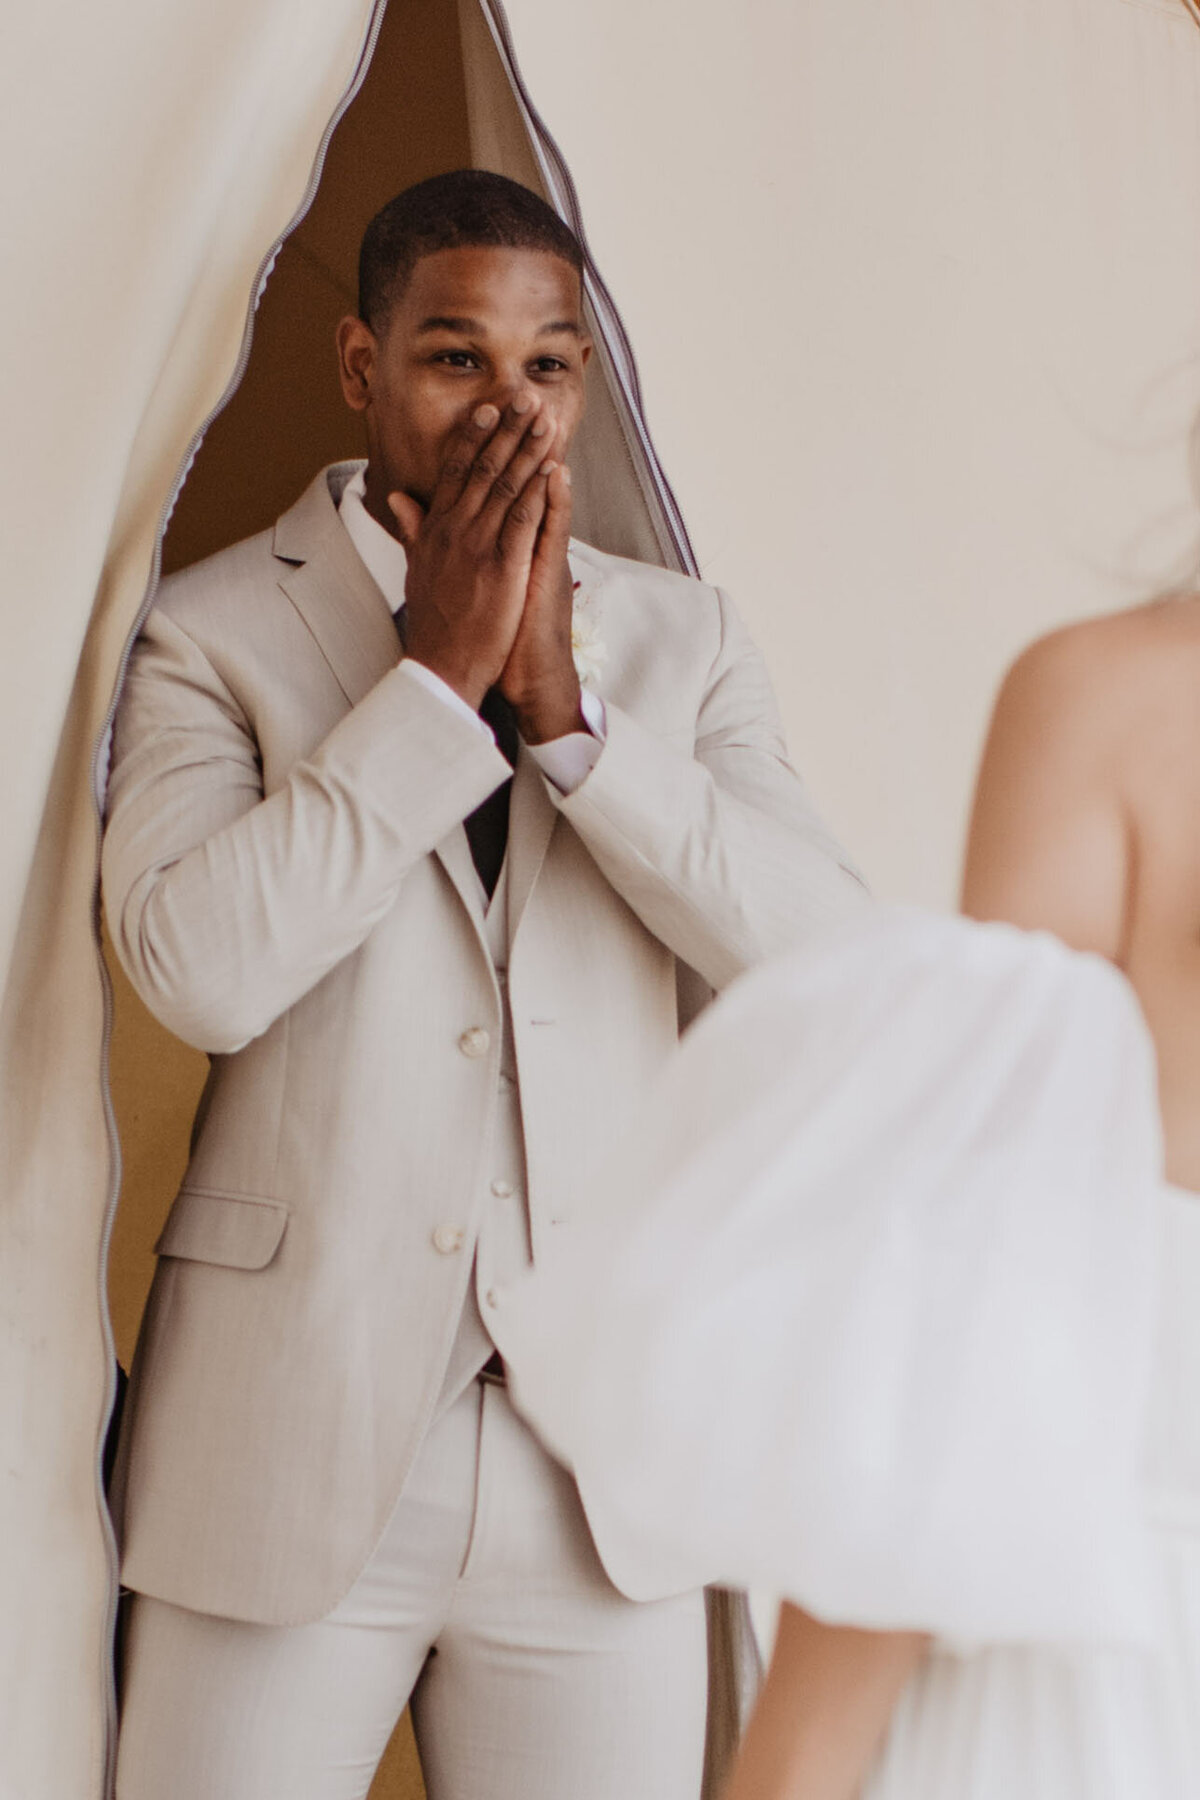 Utah Elopement Photographer captures man being shocked seeing bride for the first time on wedding day